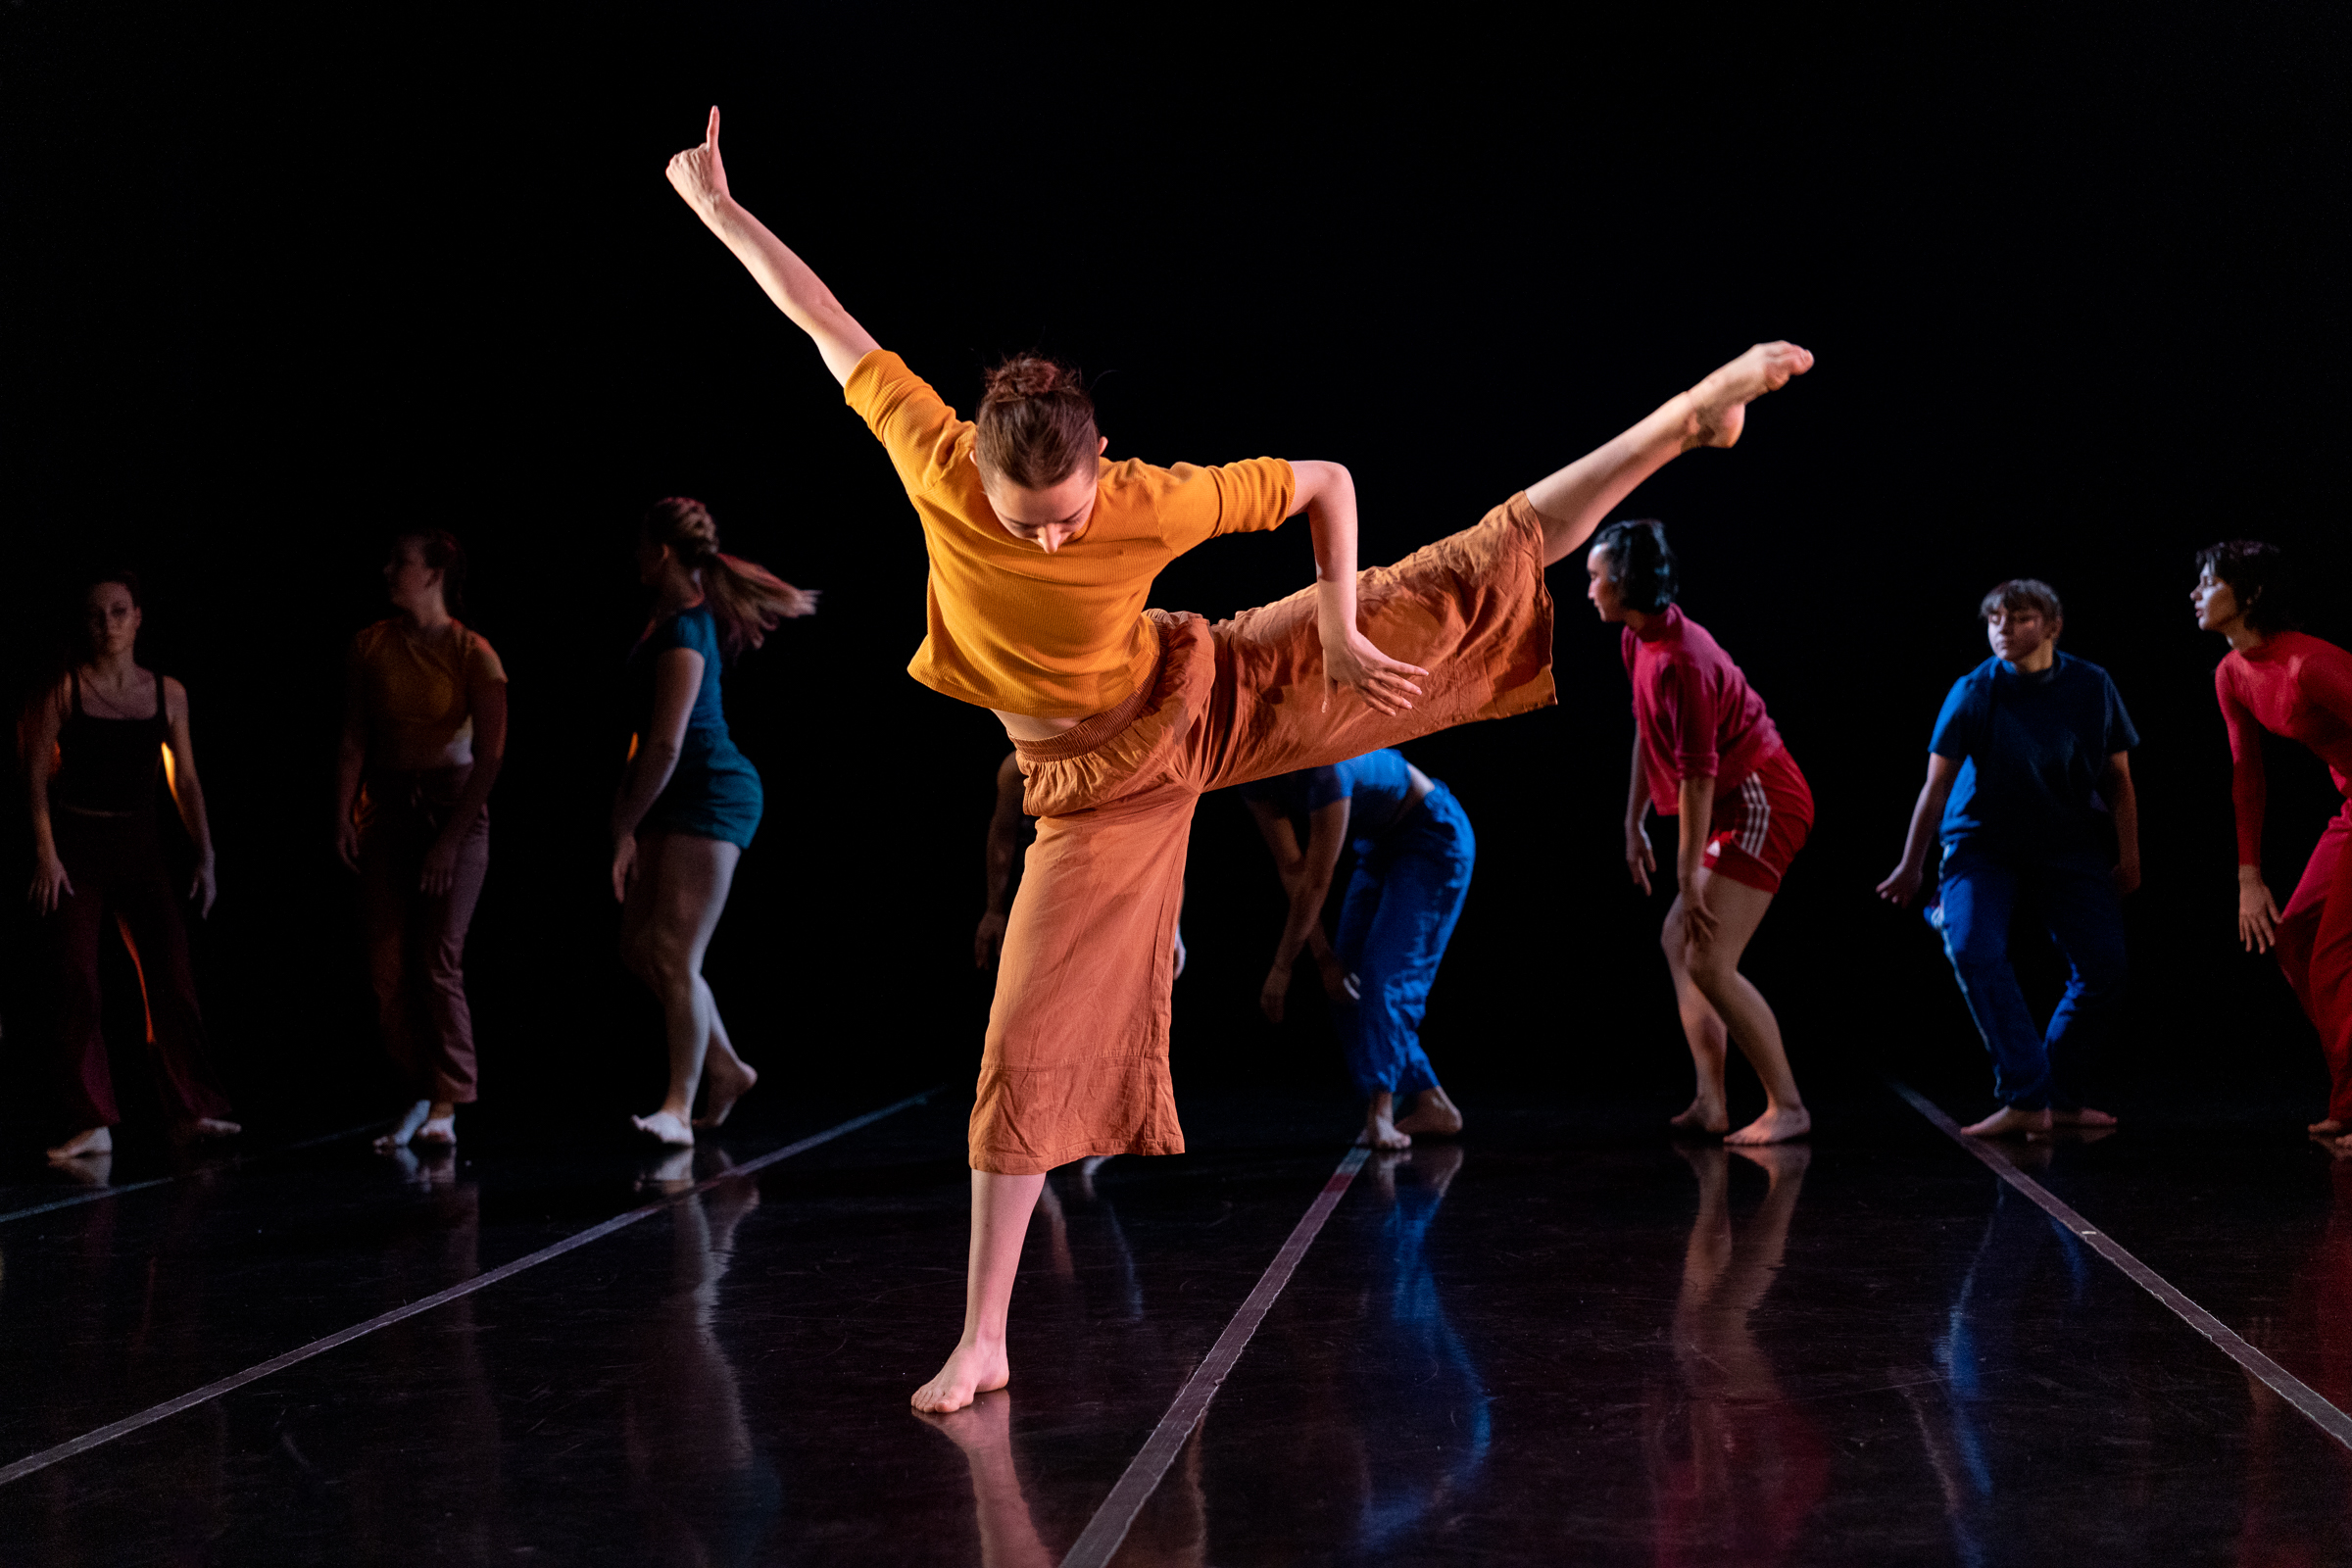 LINES Ballet Training Program dancers performing on stage in a showcase; a dancer in orange, who is holding their leg up to the side, is the focal point.